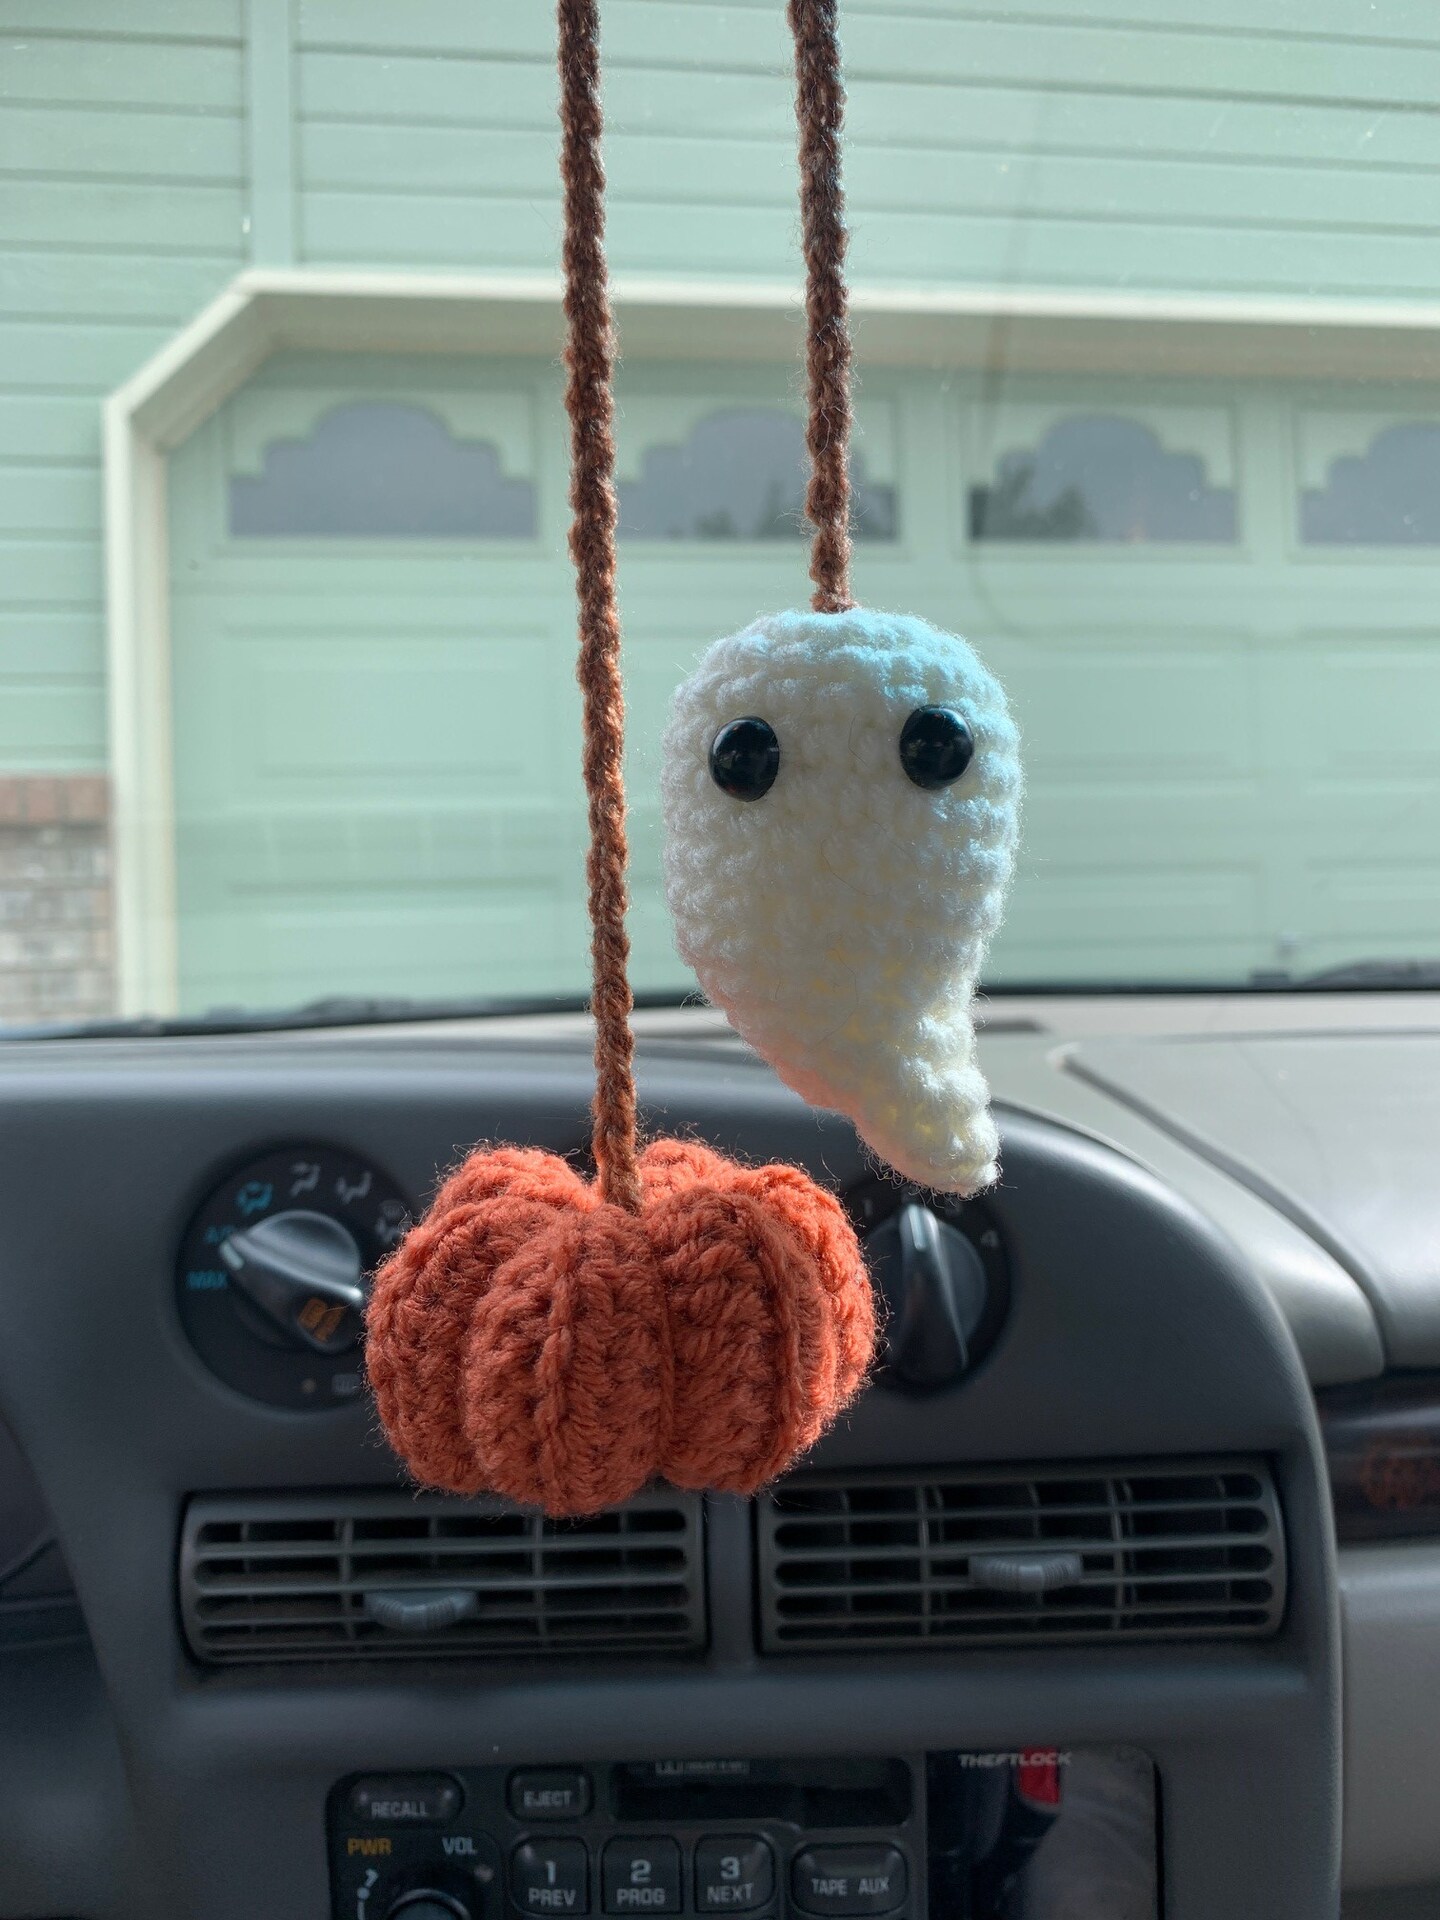 Hallween Decor, Ghost and Pumpkin Car Charm, Crocheted Plush Ghost, Gifts  under 20 for new driver, cute fuzzy dice, rear view mirror charm